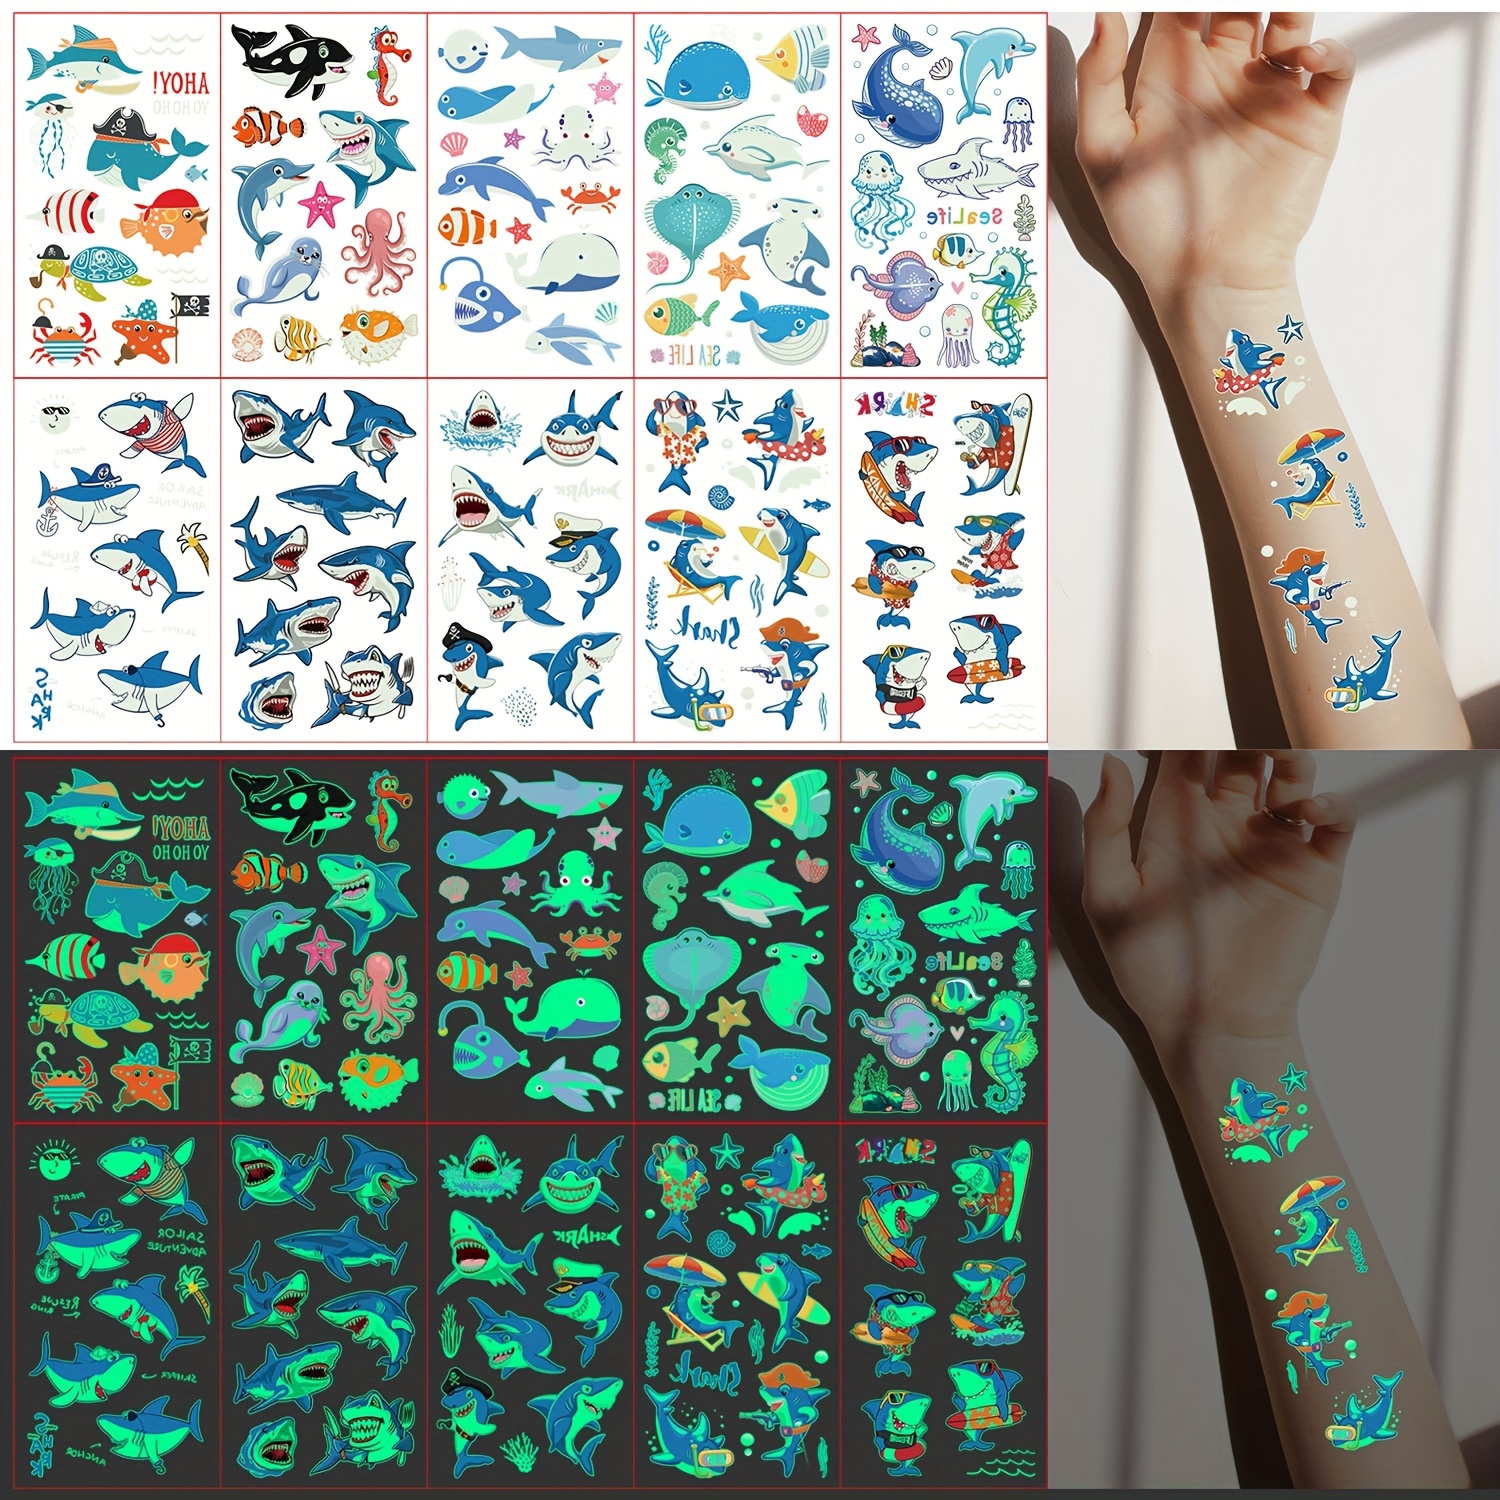 

10 Sheets Of Luminous Tattoo Stickers, With Cute Cartoon Shark, Whale, Dolphin, And Ocean Animal Patterns, Waterproof And Sweatproof Temporary Tattoo Stickers That Glow In The Dark For Music Festival